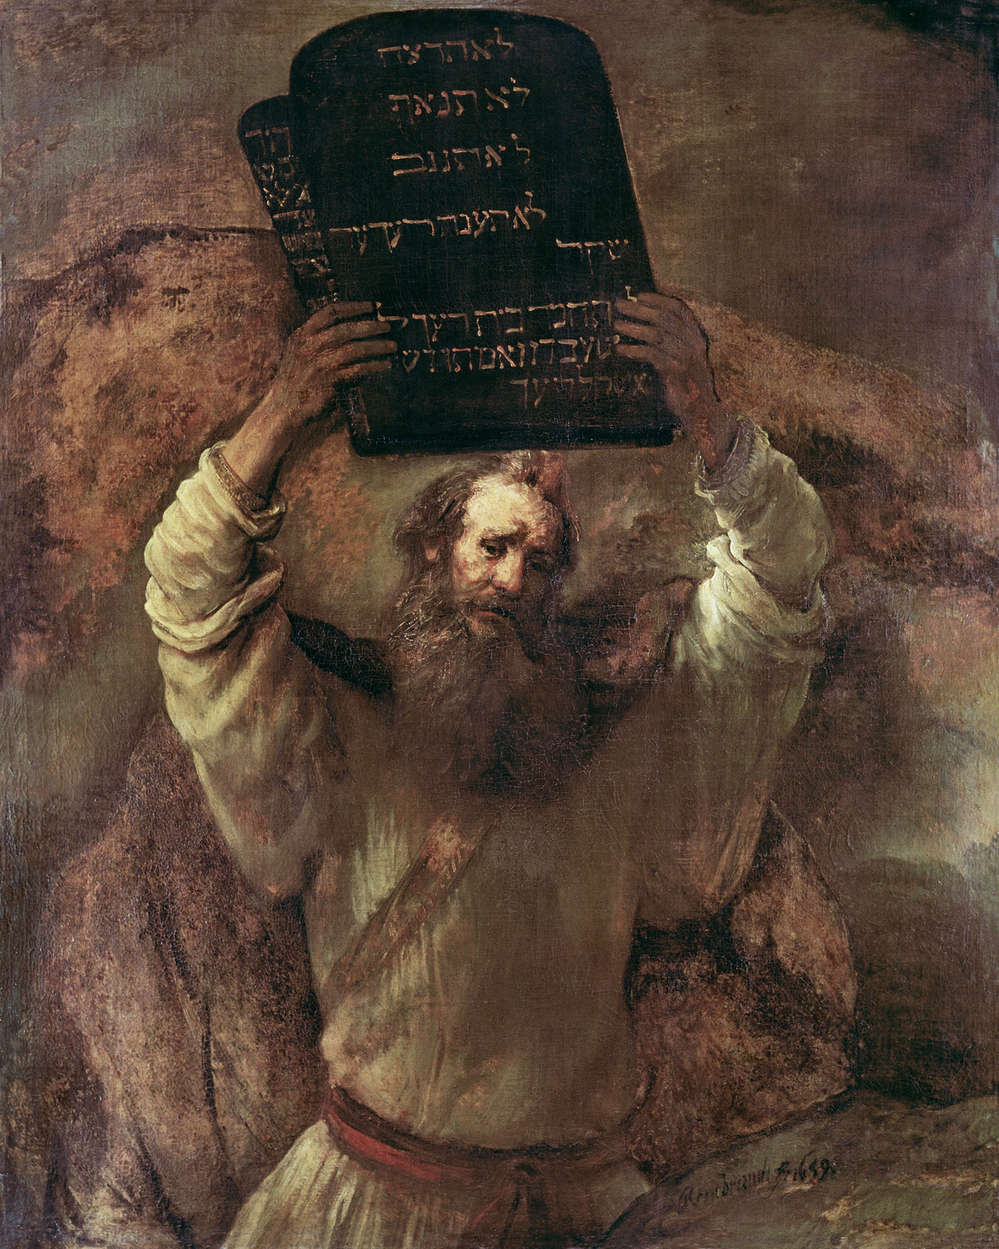             Photo wallpaper "Moses smashes the tablets of the law" by Rembrandt van Rijn
        